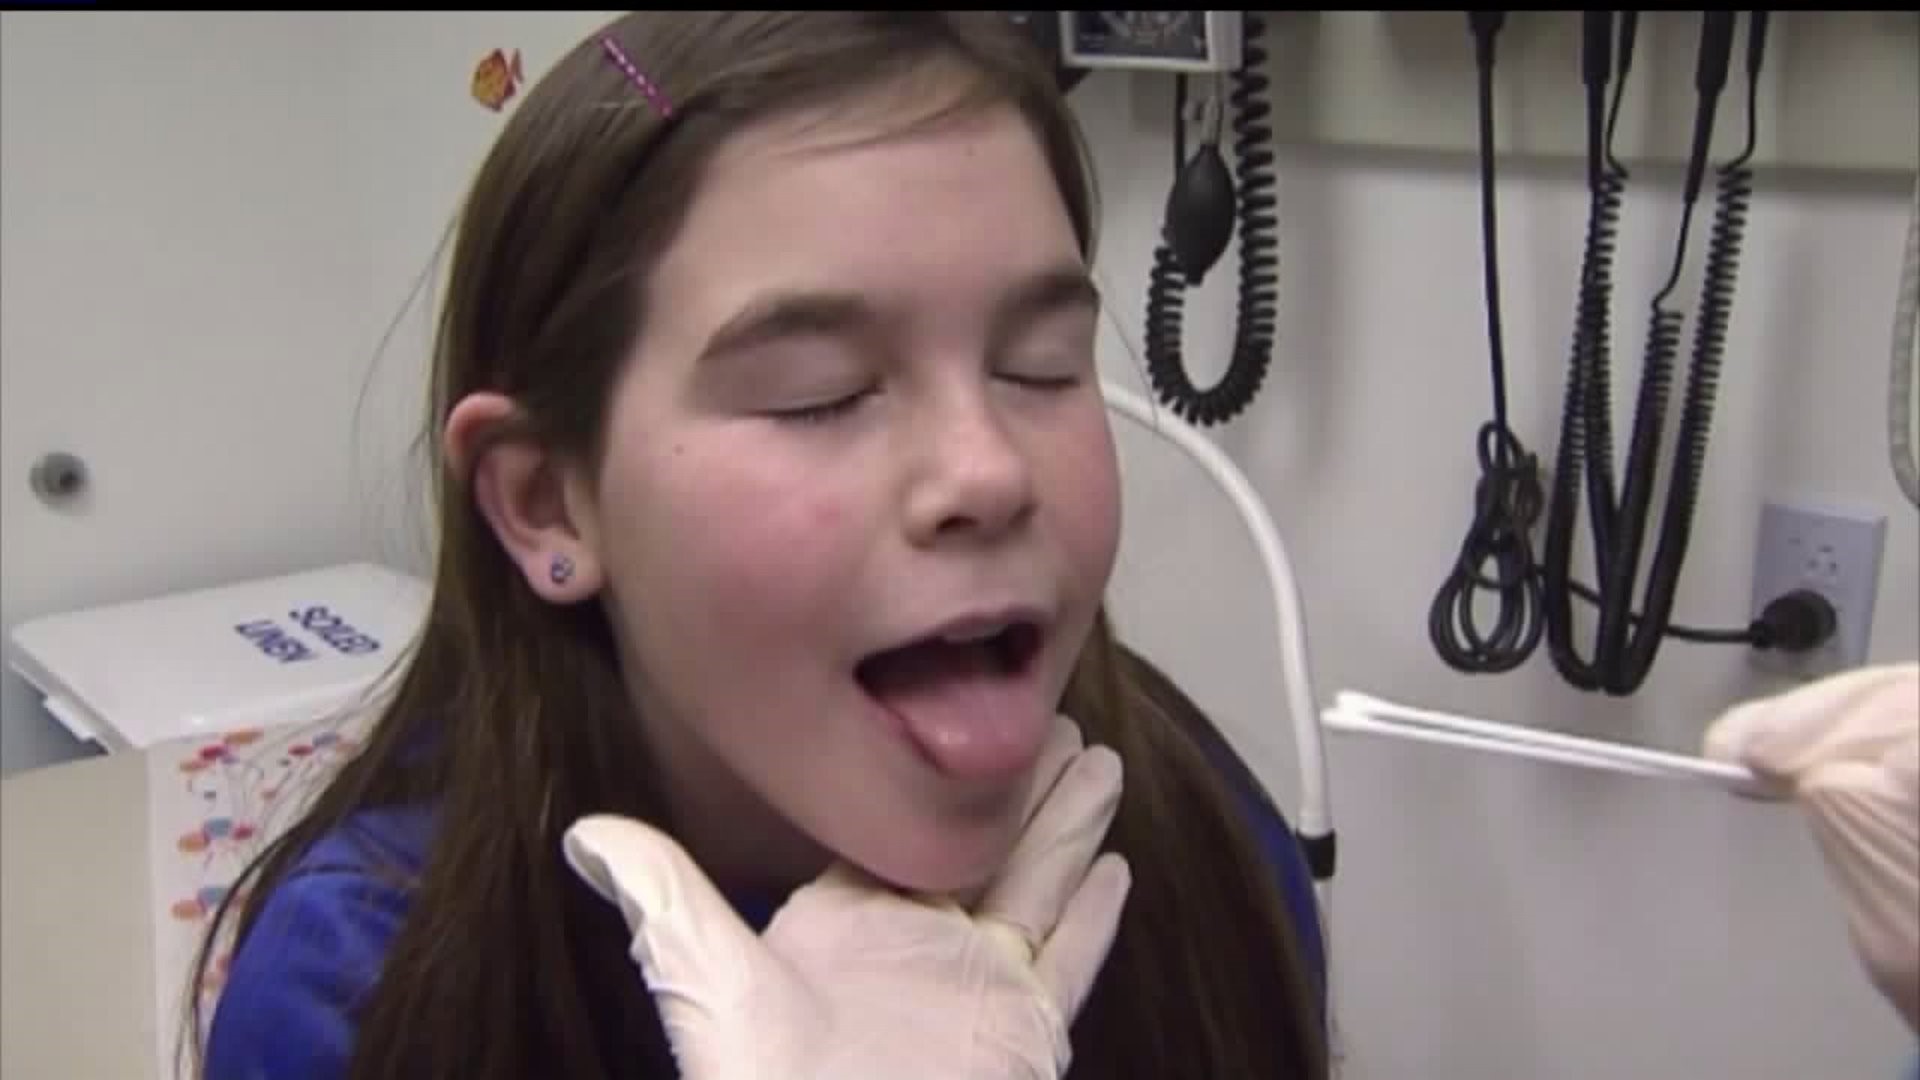 When should you take your child to be checked for strep throat?